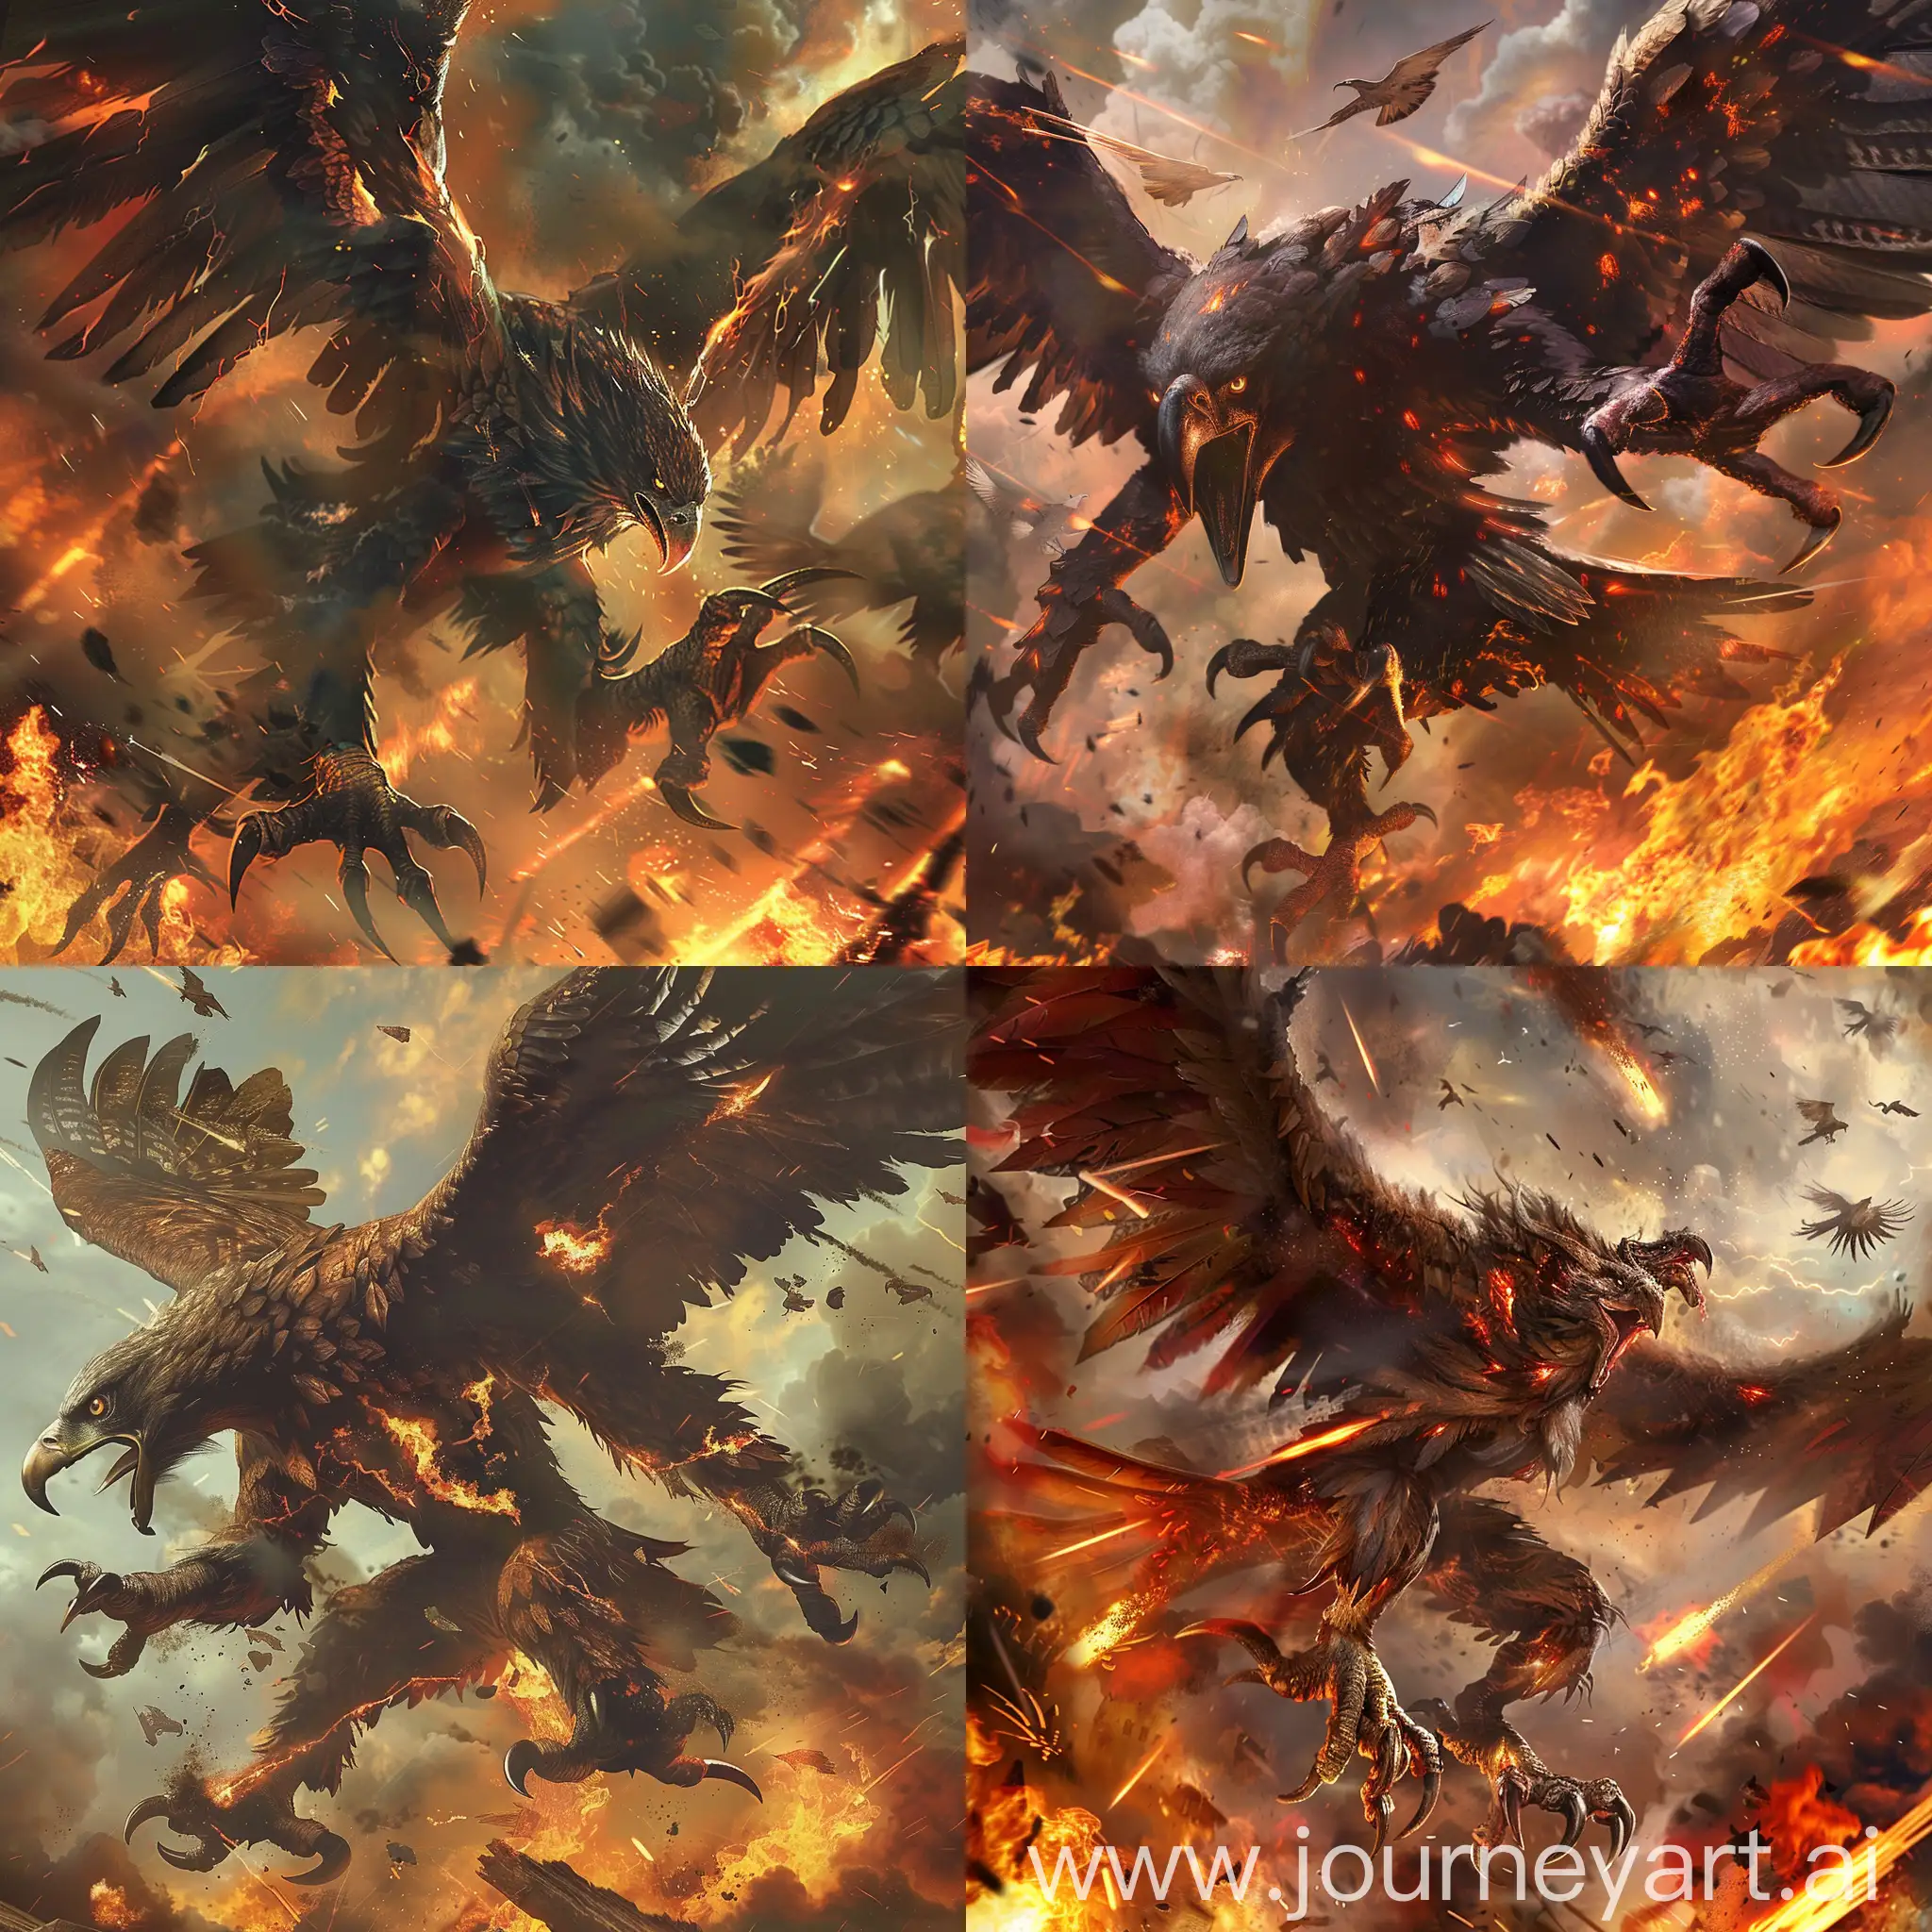 imagine realistic deamon with eagle's wings, claws, and beak, fighting in a war battle with fire and smoke